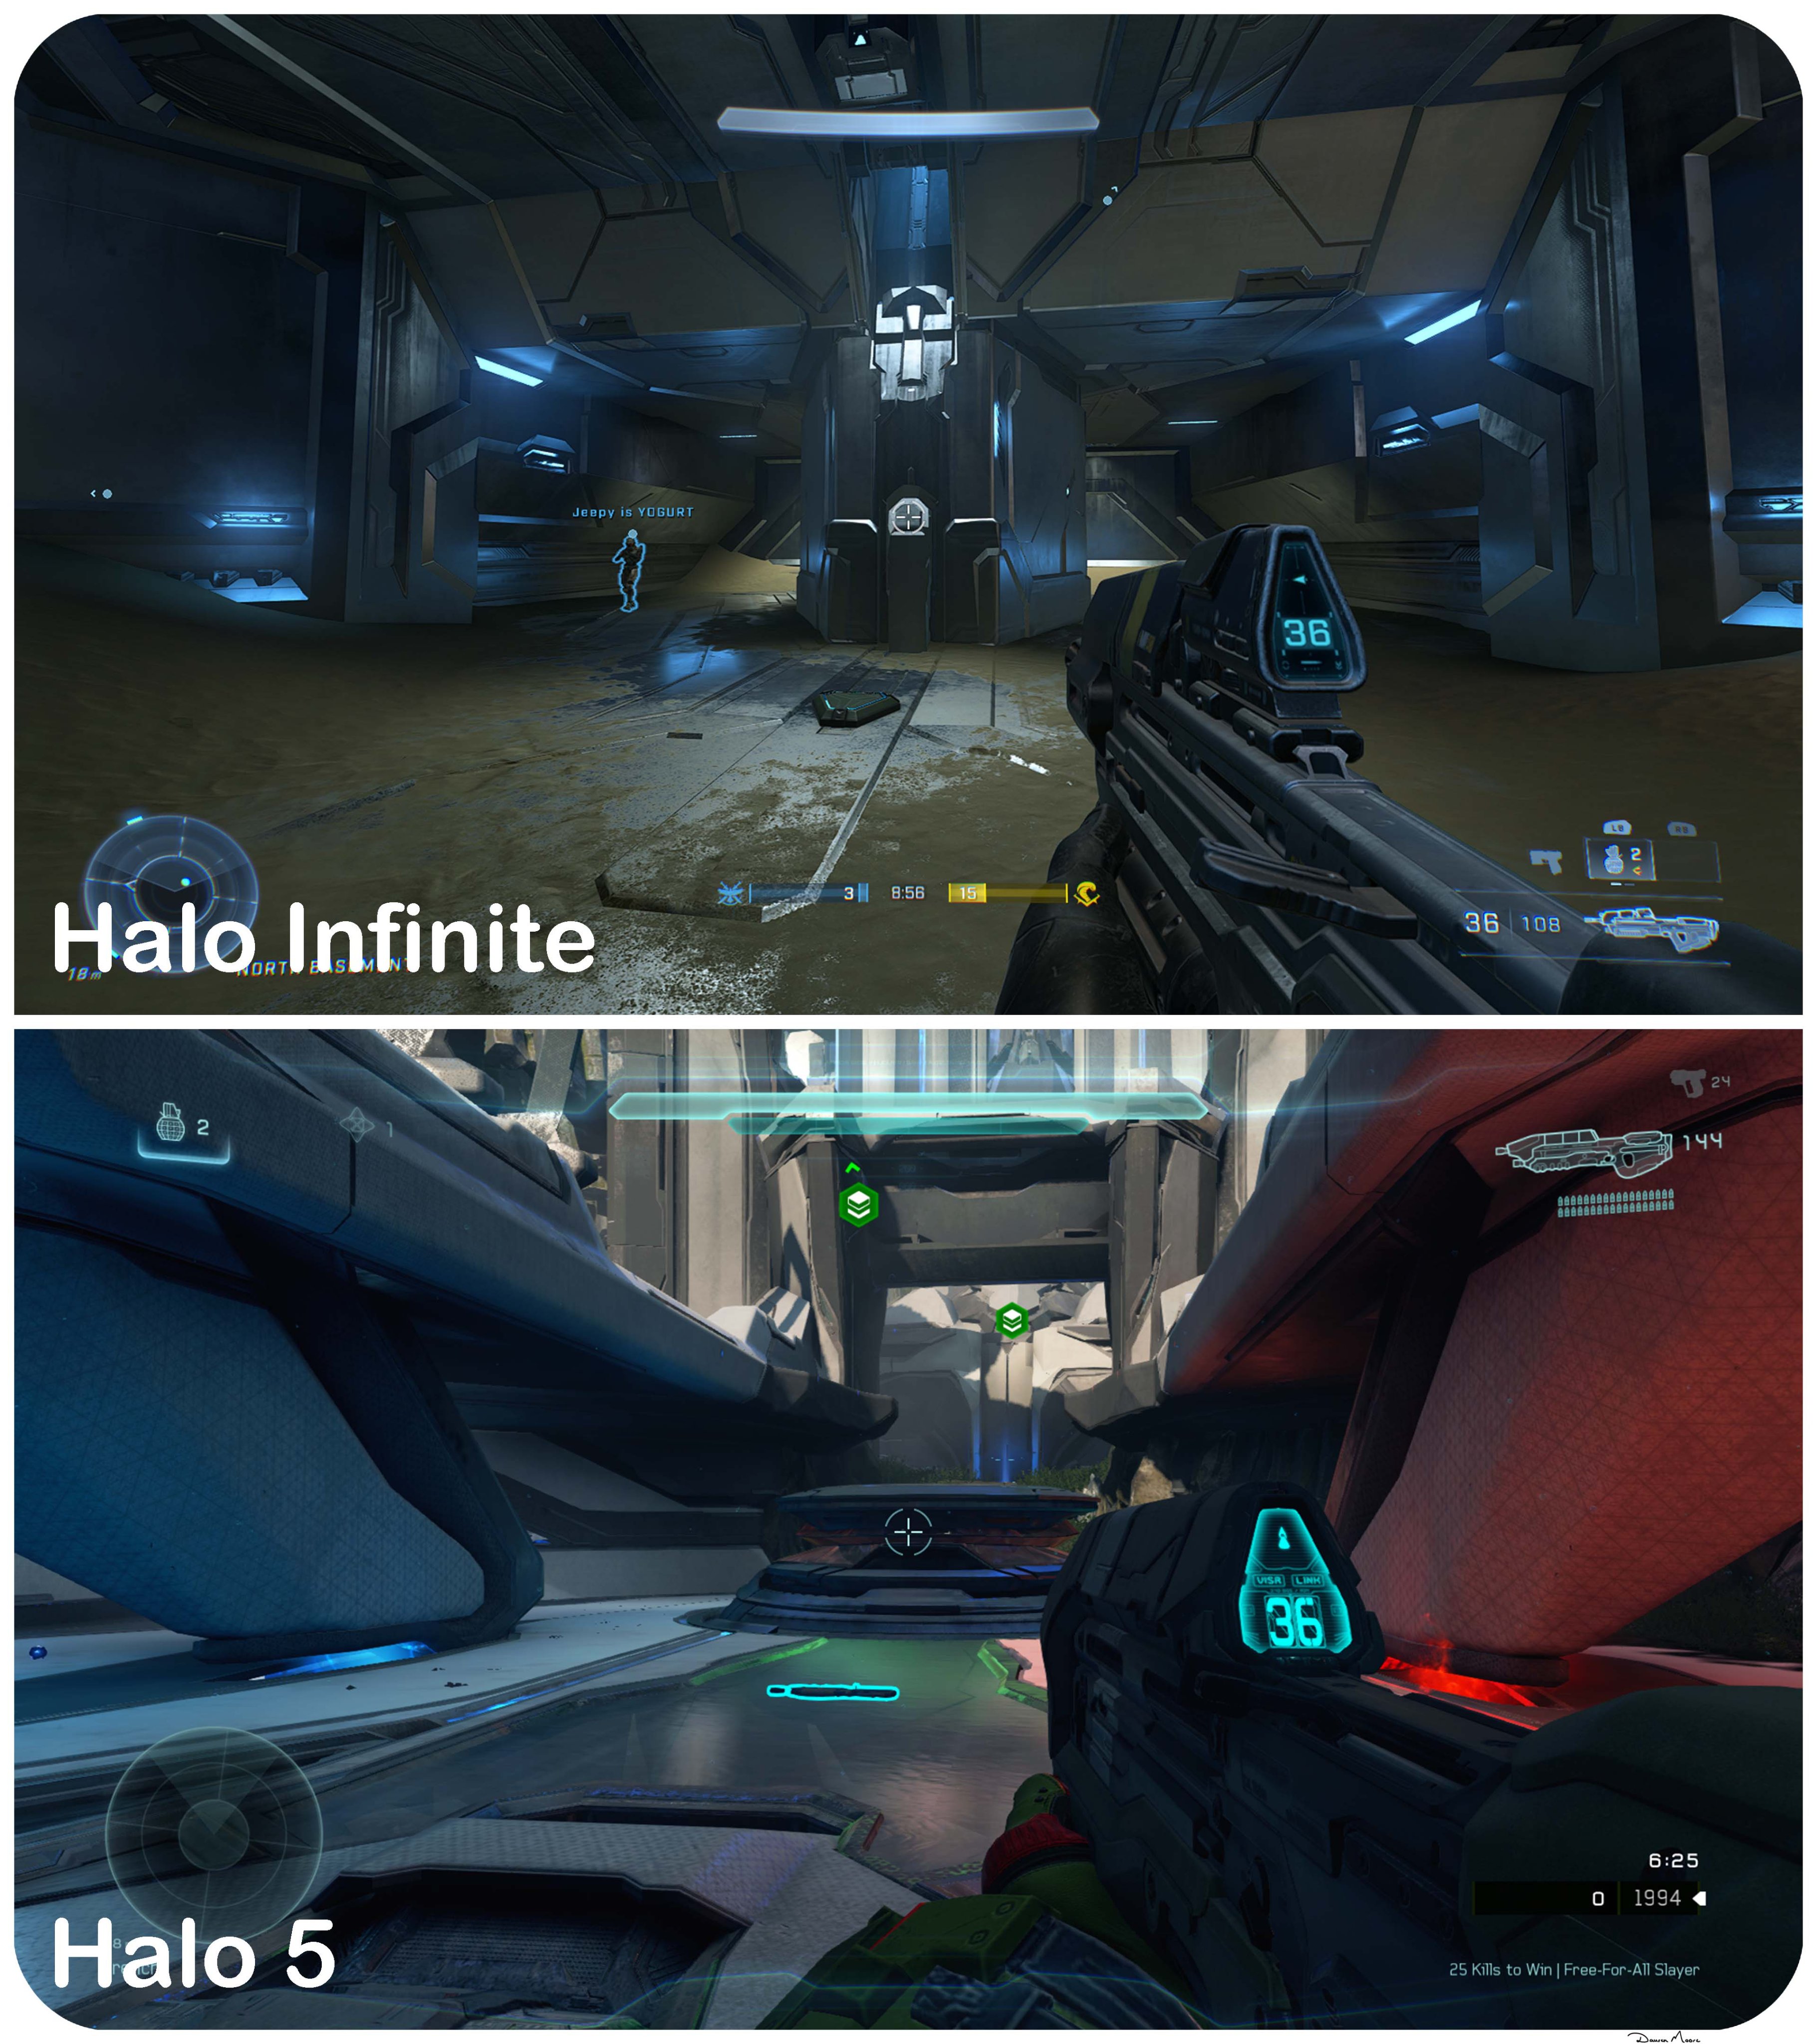 Halo Infinite vs. Halo 5 Guardians: Here's how they compare